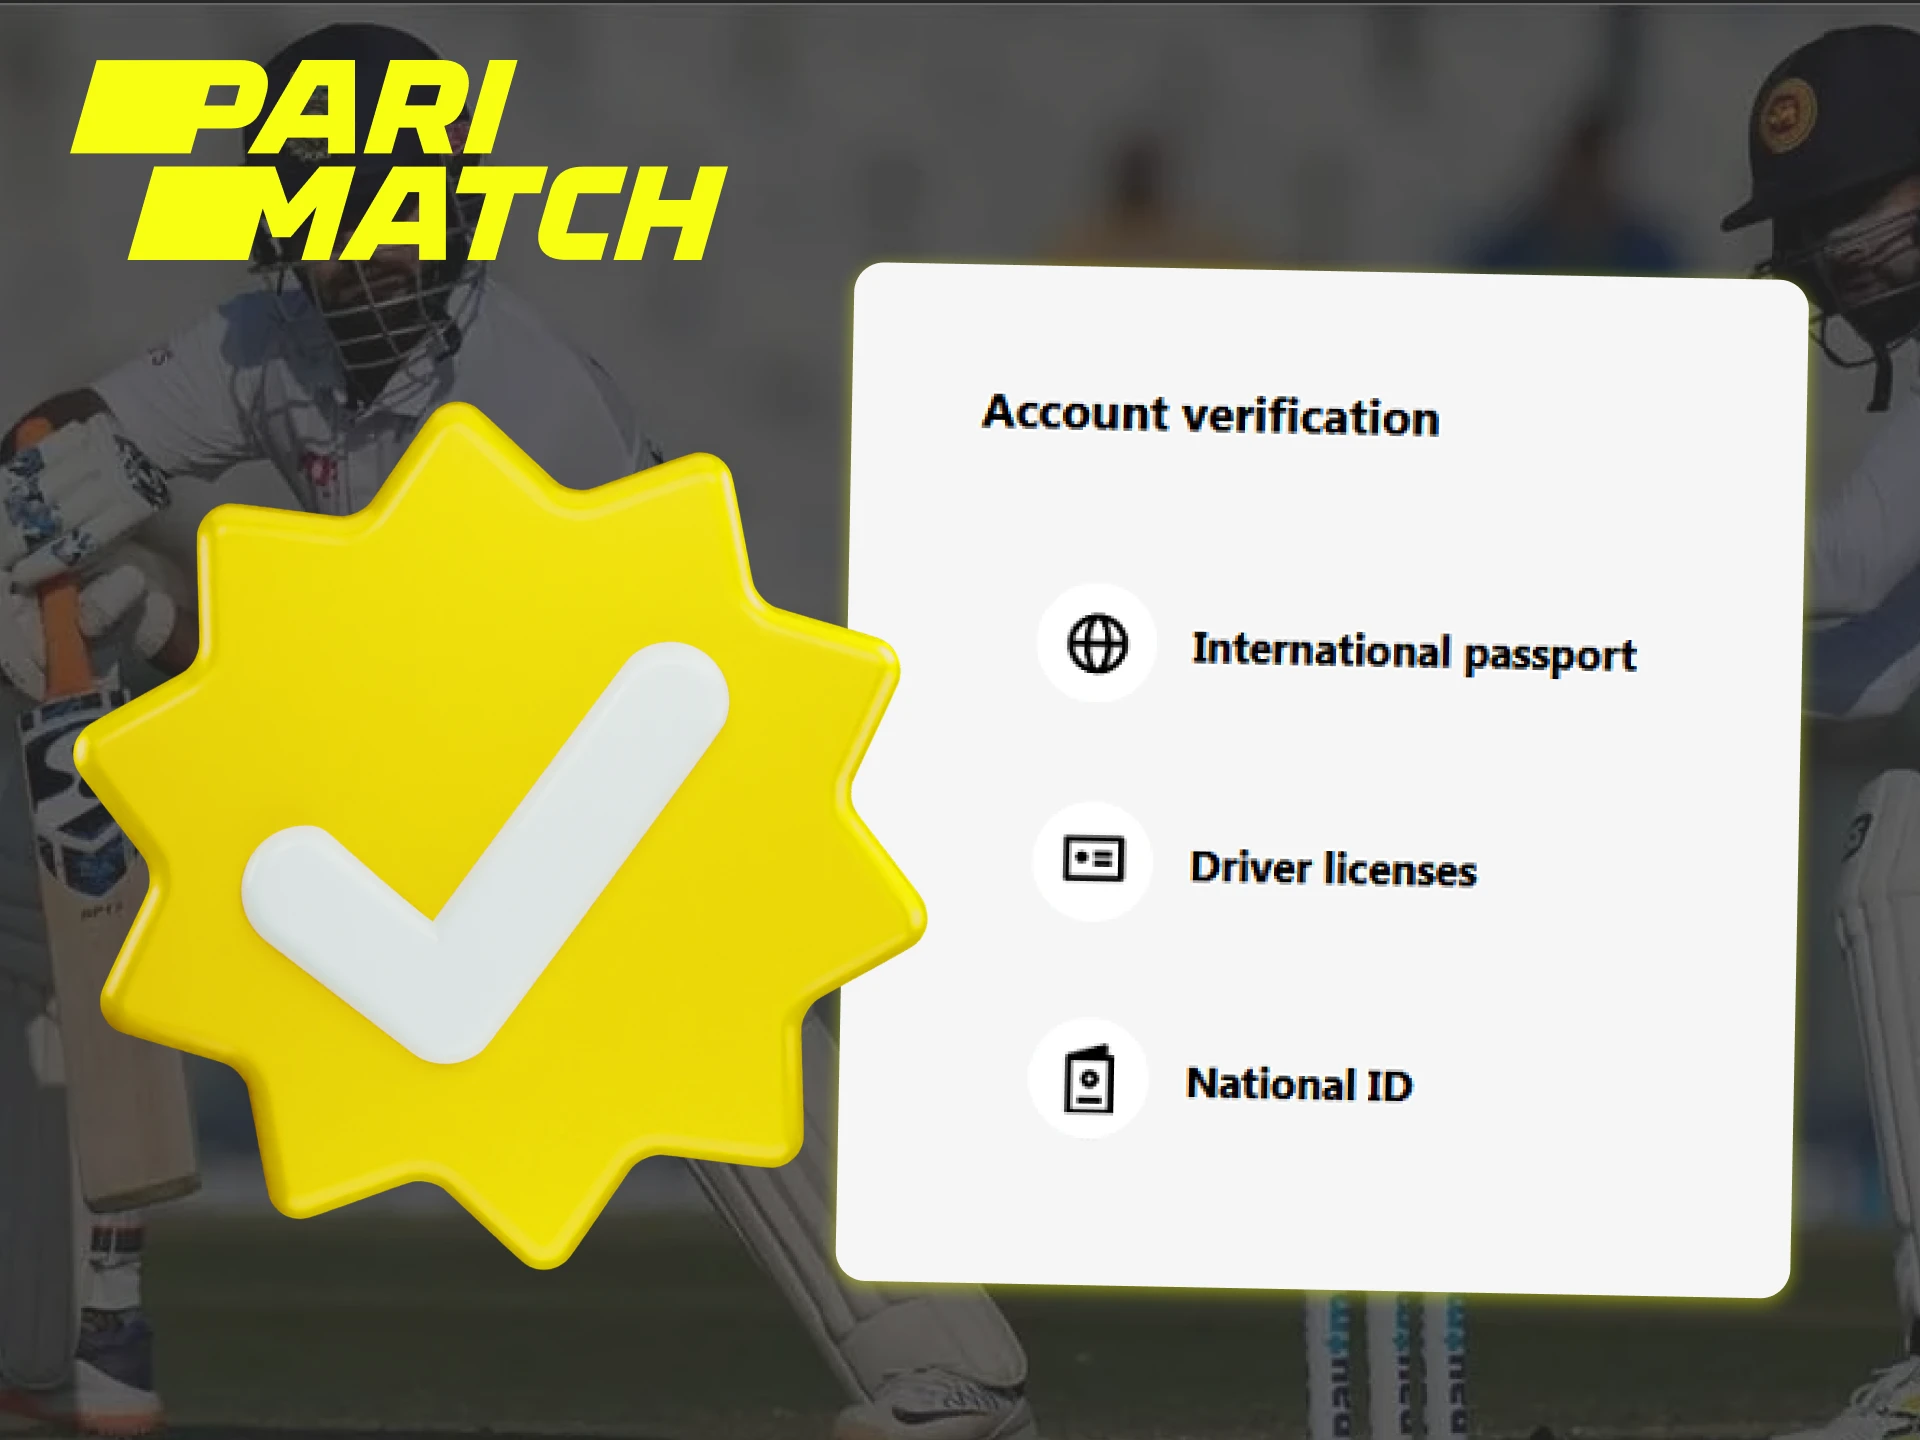 Before you can withdraw funds to Parimatch, you need to undergo verification.